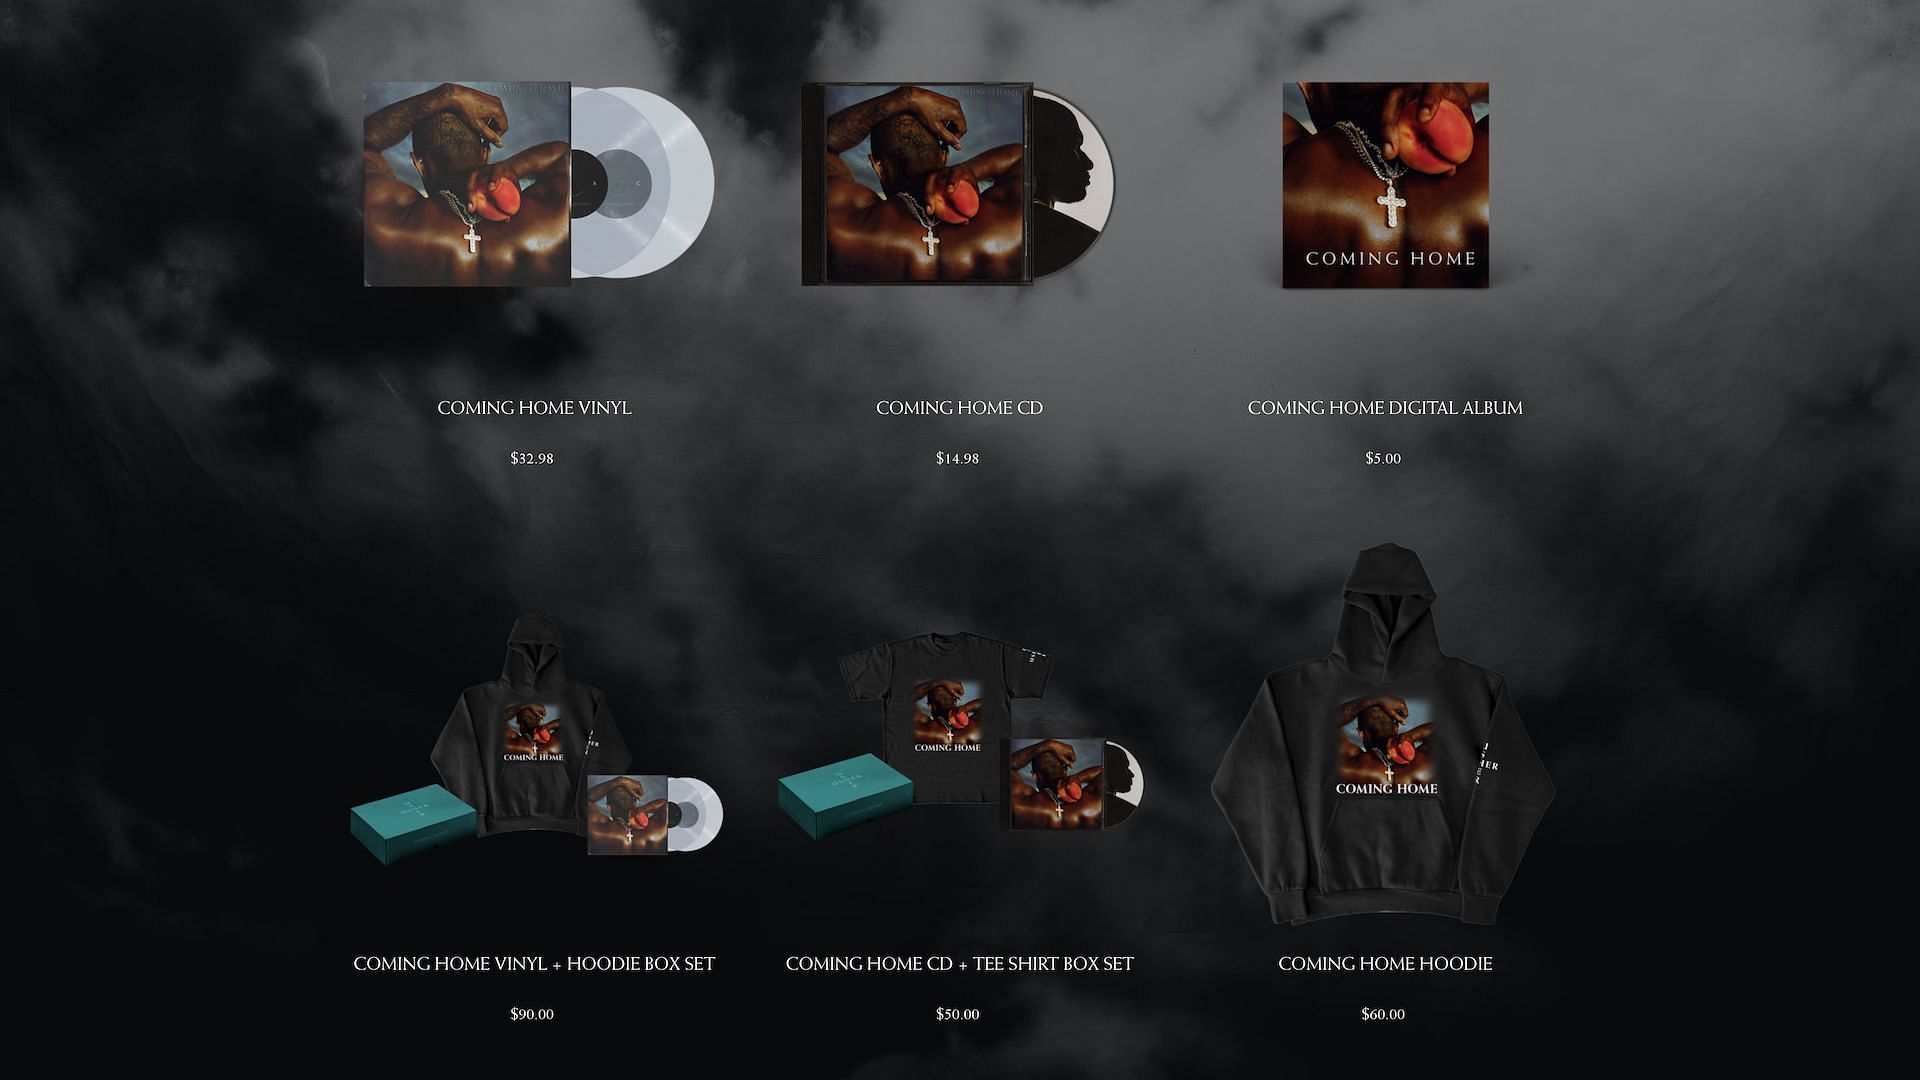 Prices for the Coming Home Vinyl, Merch bundles, and physical copies available for pre-order (Image via Usherworld)